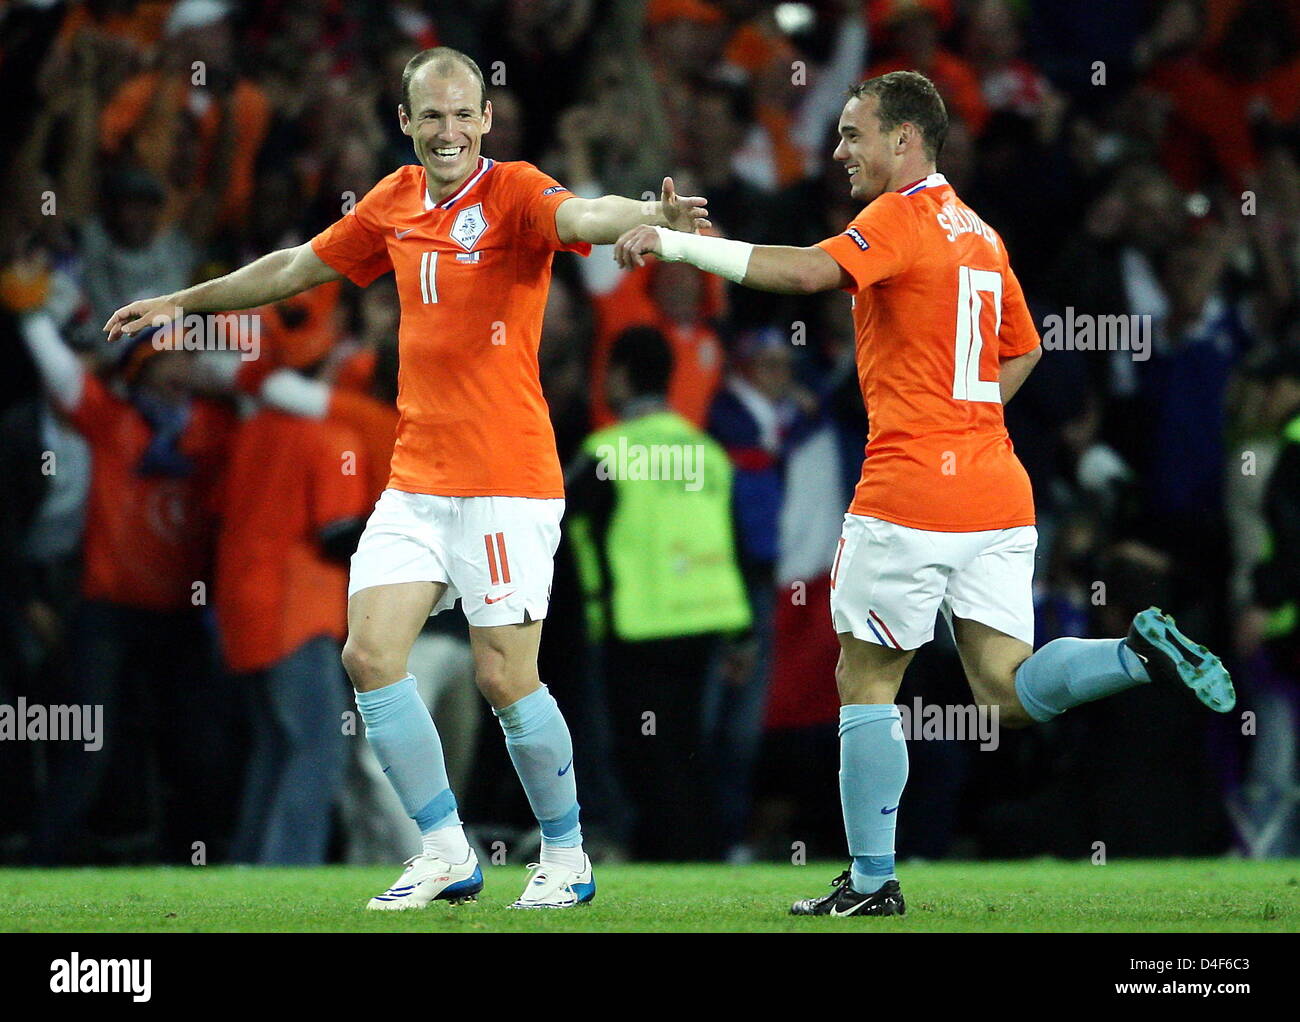 Wesley Sneijder (R) of Netherlands celebrates his 4-1 goal with Arjen Robben during the UEFA EURO 2008 Group C preliminary round match between Netherlands and France at the Stade de Suisse stadium in Berne, Switzerland, 13 June 2008. Netherlands won 4-1. Photo: Ronald Wittek dpa +please note UEFA restrictions particulary in regard to slide shows and 'No Mobile Services'+ +++(c) dpa Stock Photo